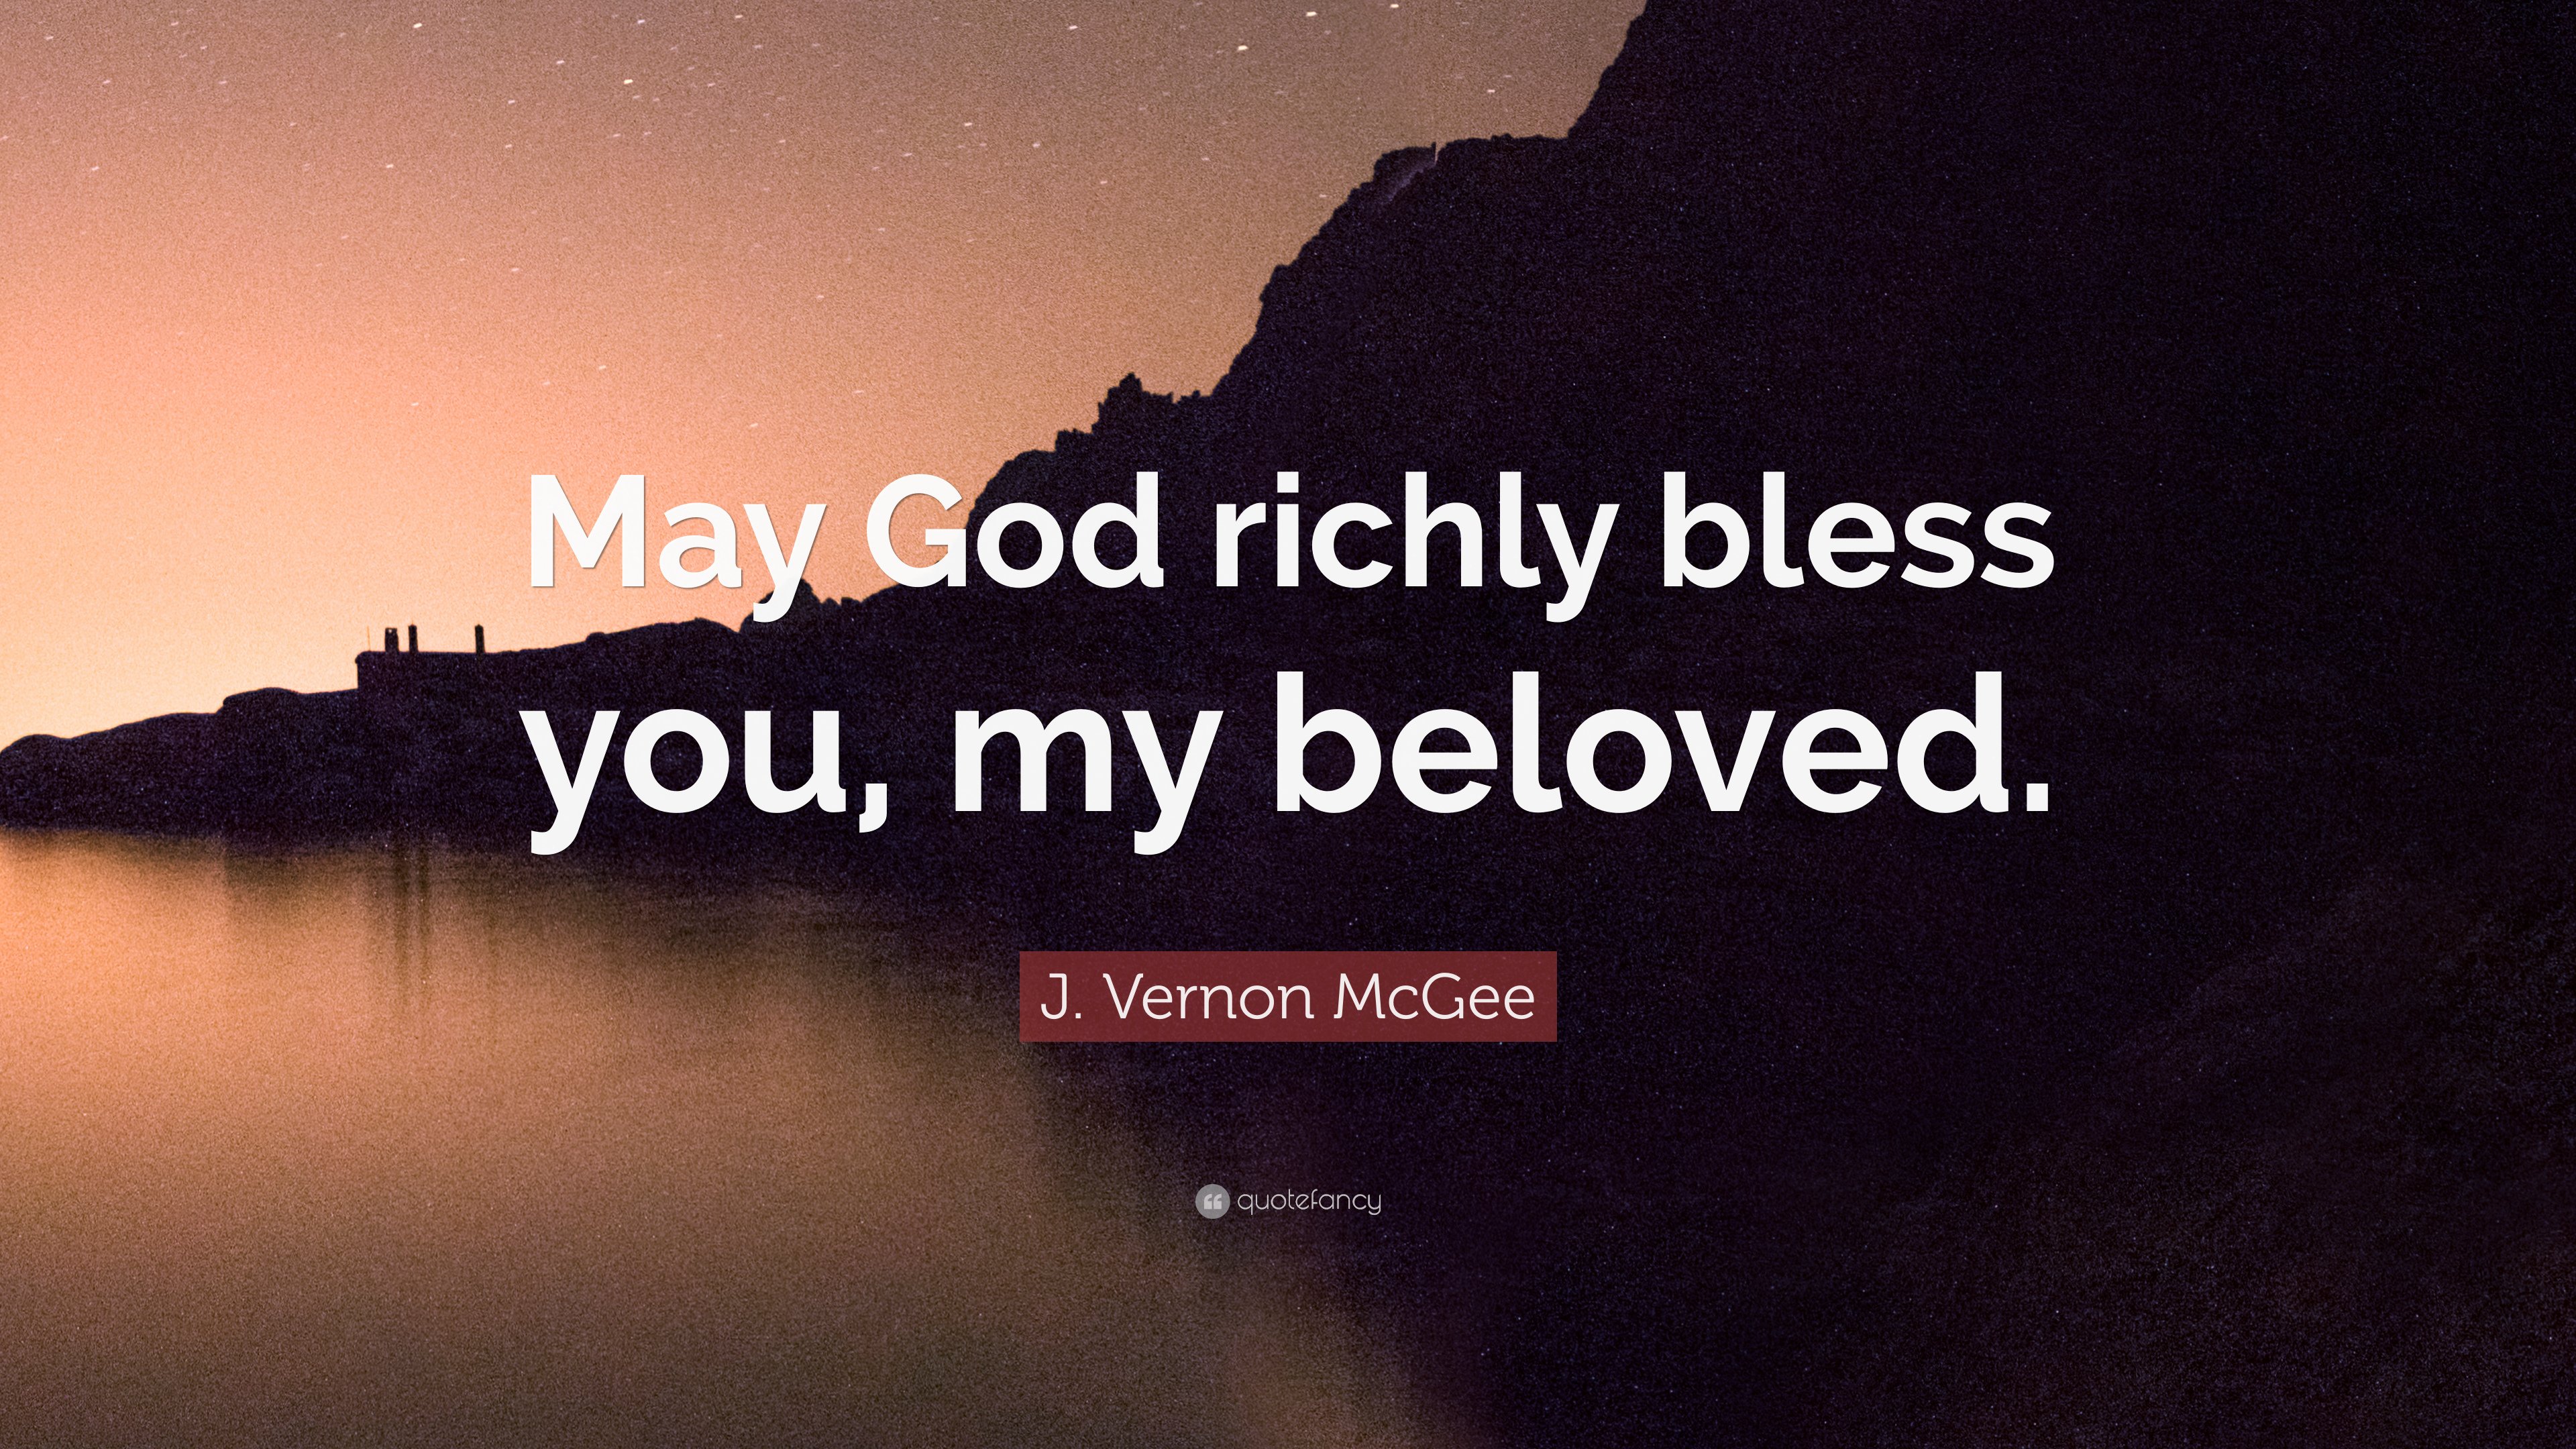 J. Vernon McGee Quote: “May God richly bless you, my beloved.”